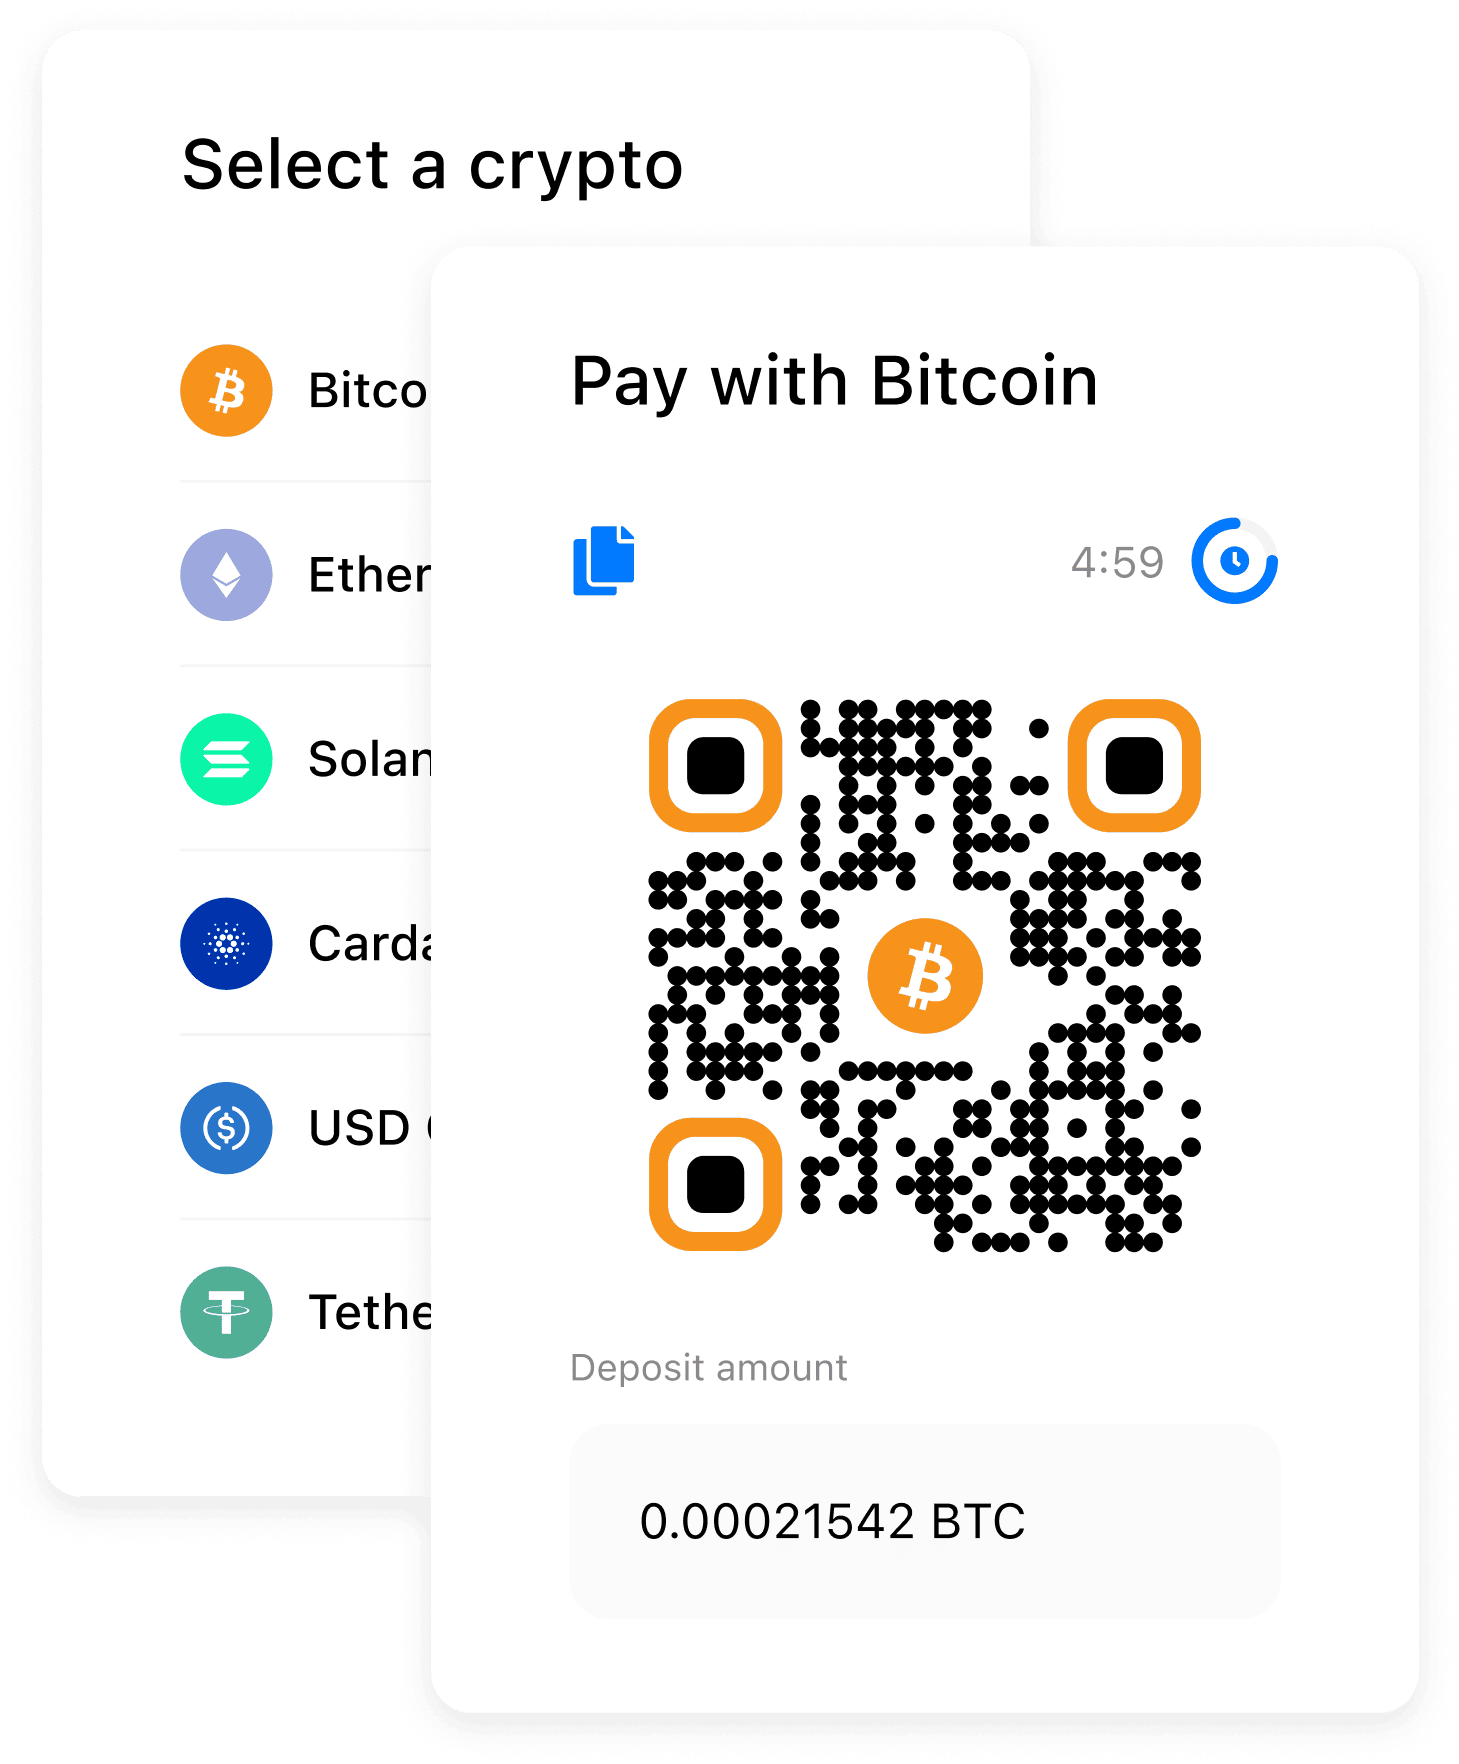 Accept crypto payments and get settled in cash